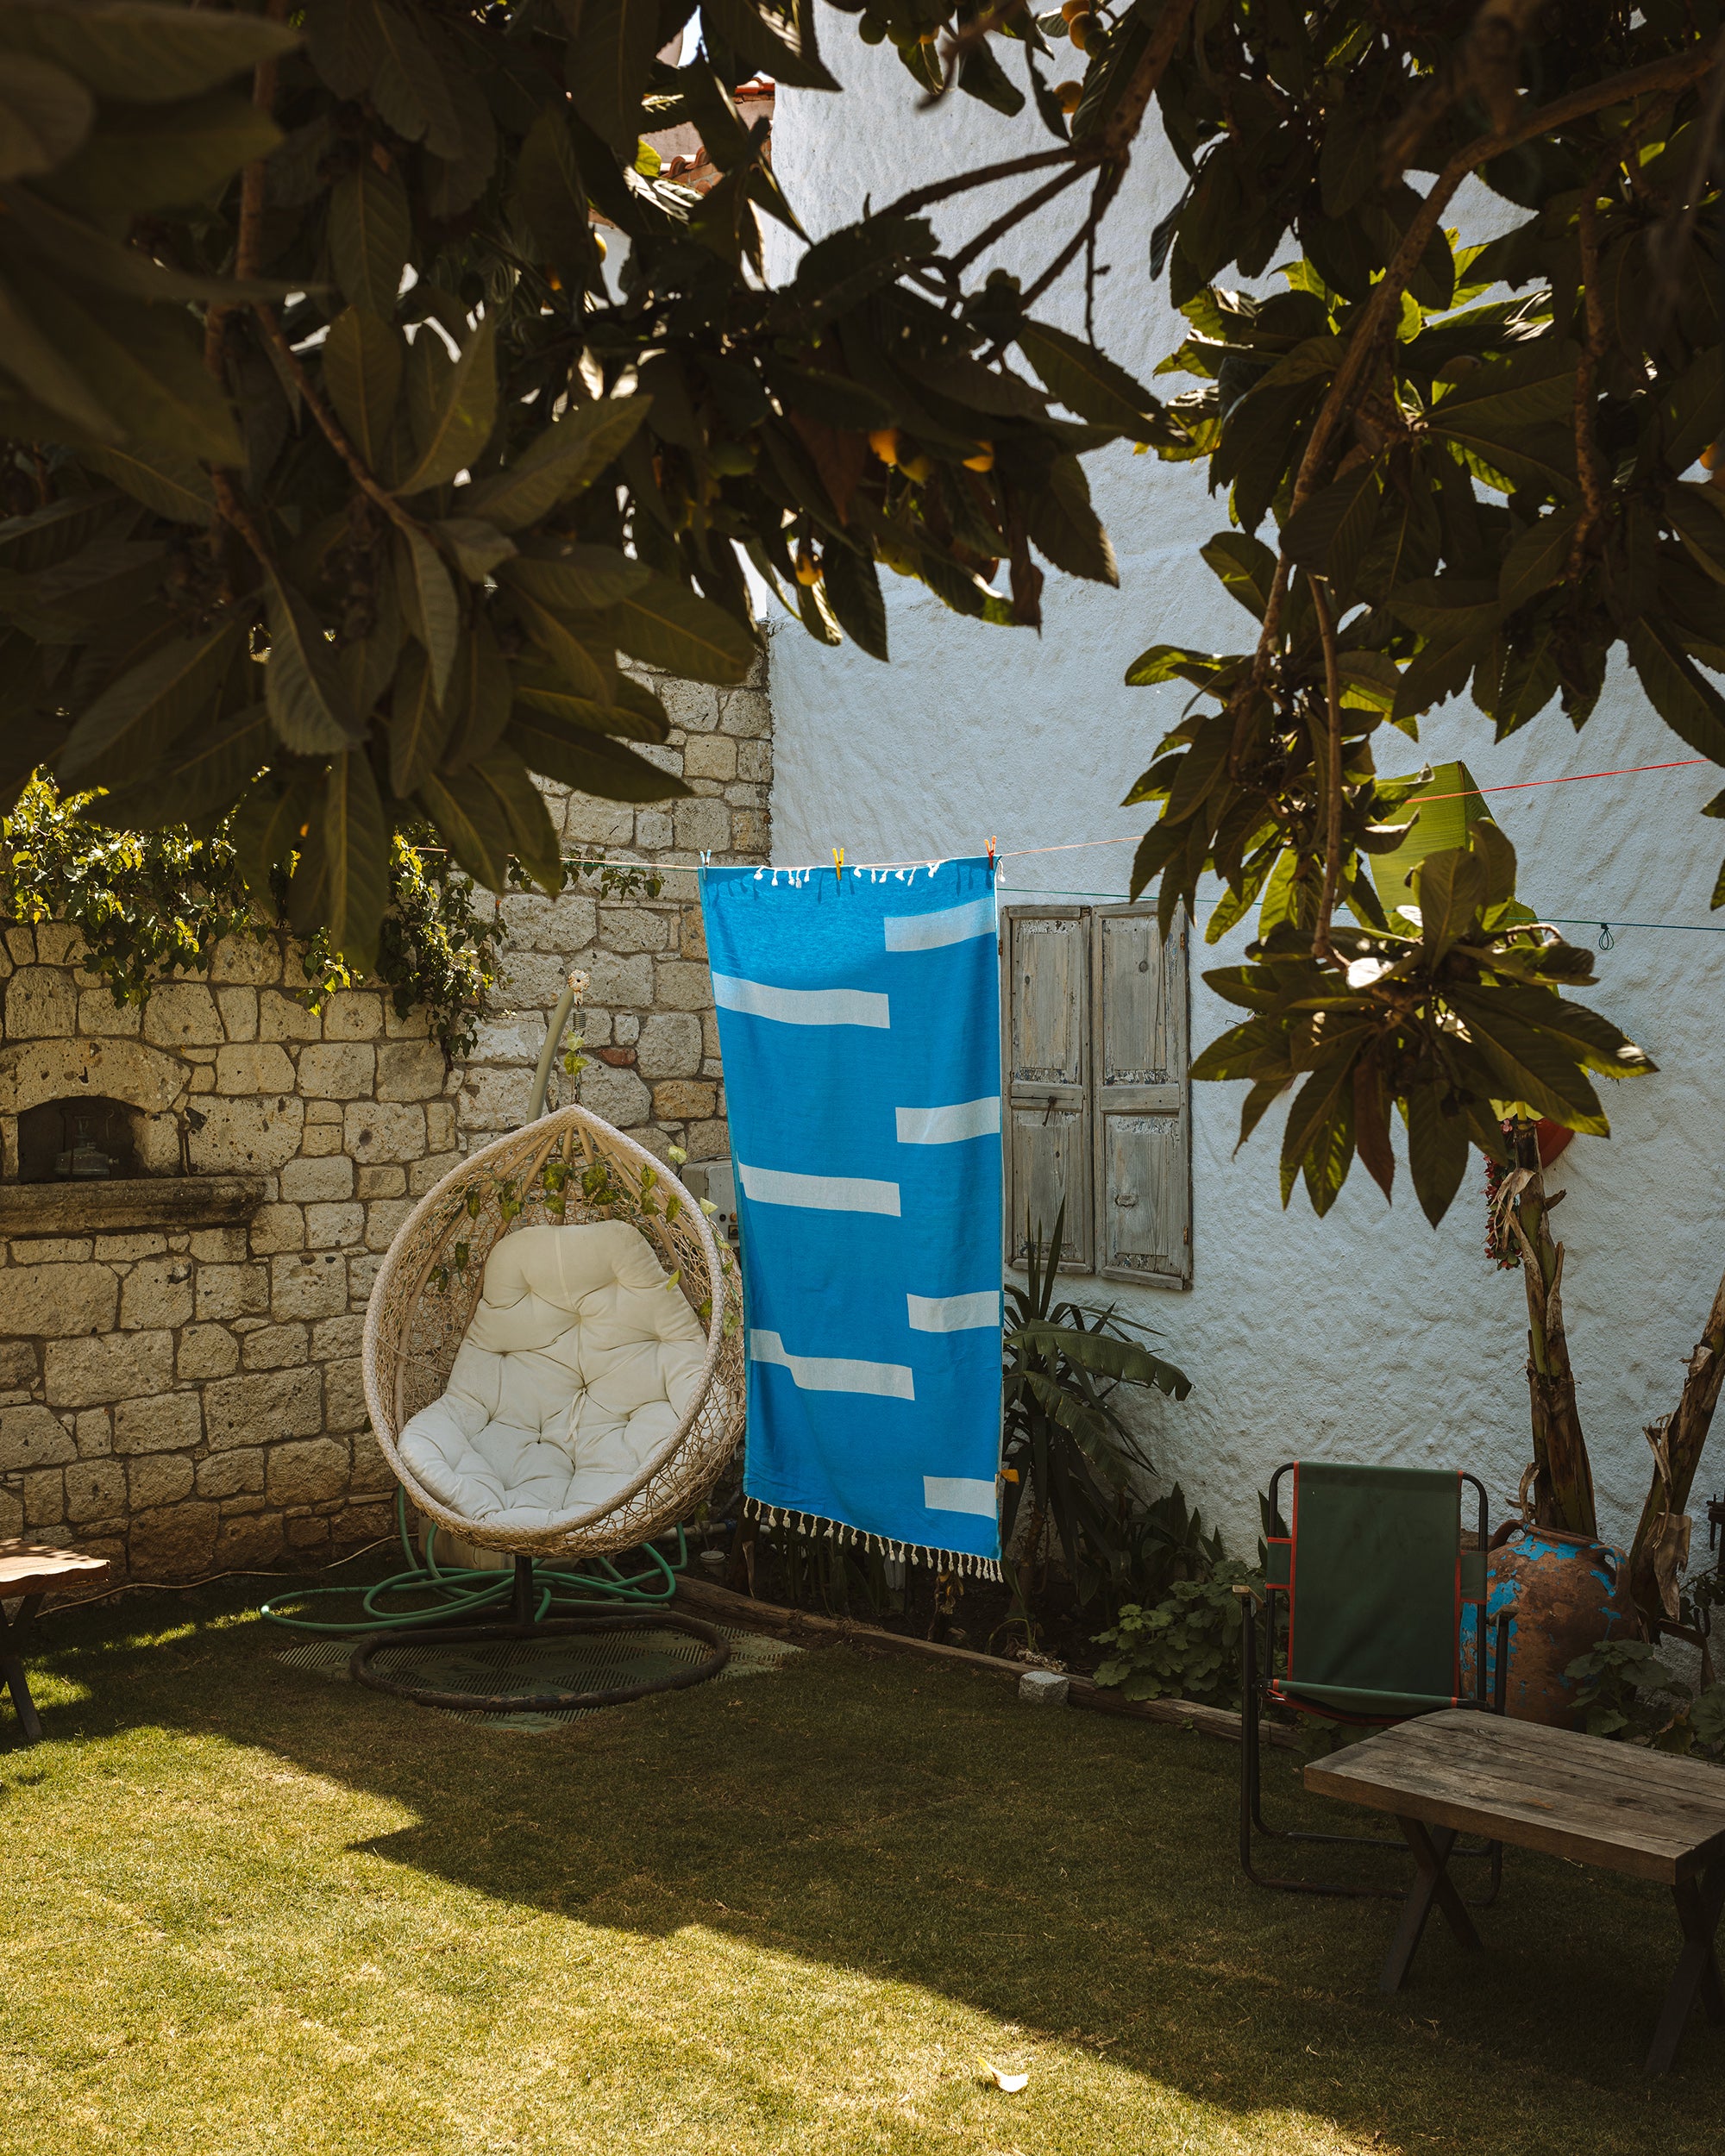 FROM BATH TO BEYOND: TRANSFORMING SPACES WITH TURKISH TOWELS